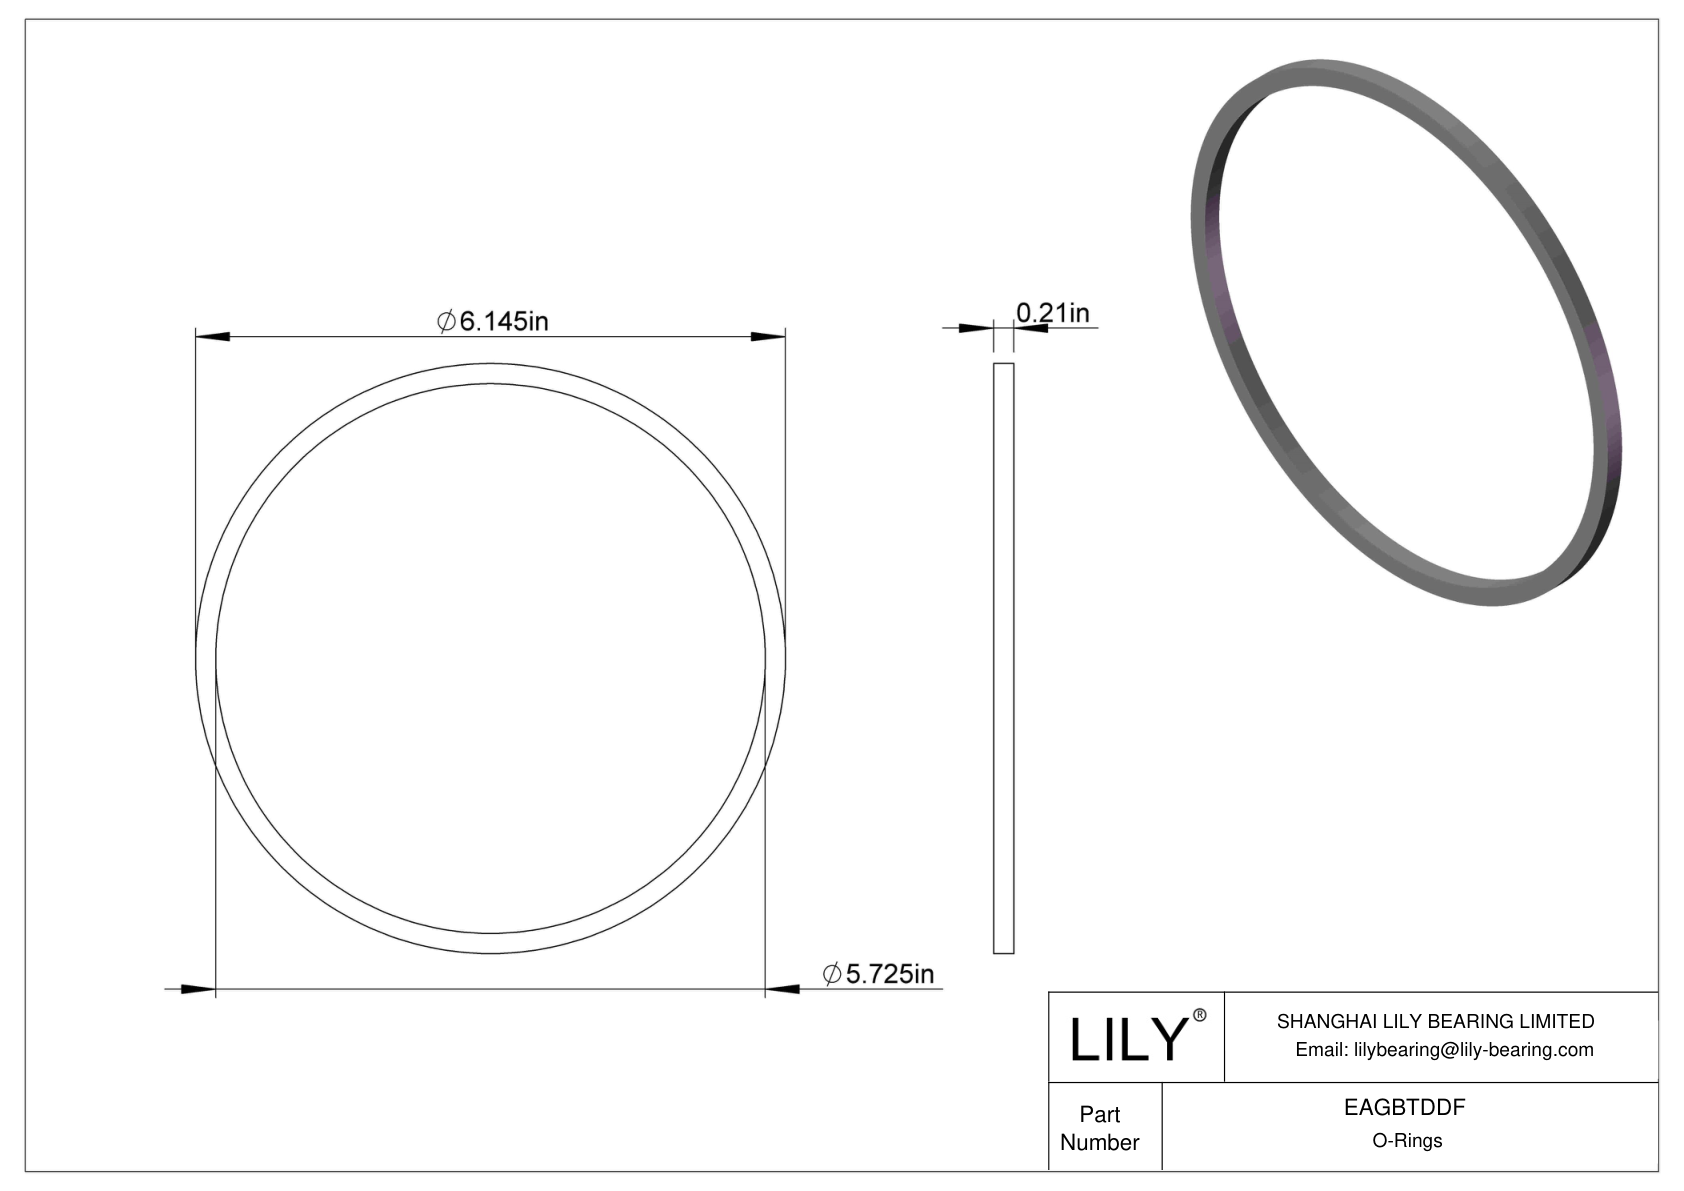 EAGBTDDF Oil Resistant O-Rings Square cad drawing